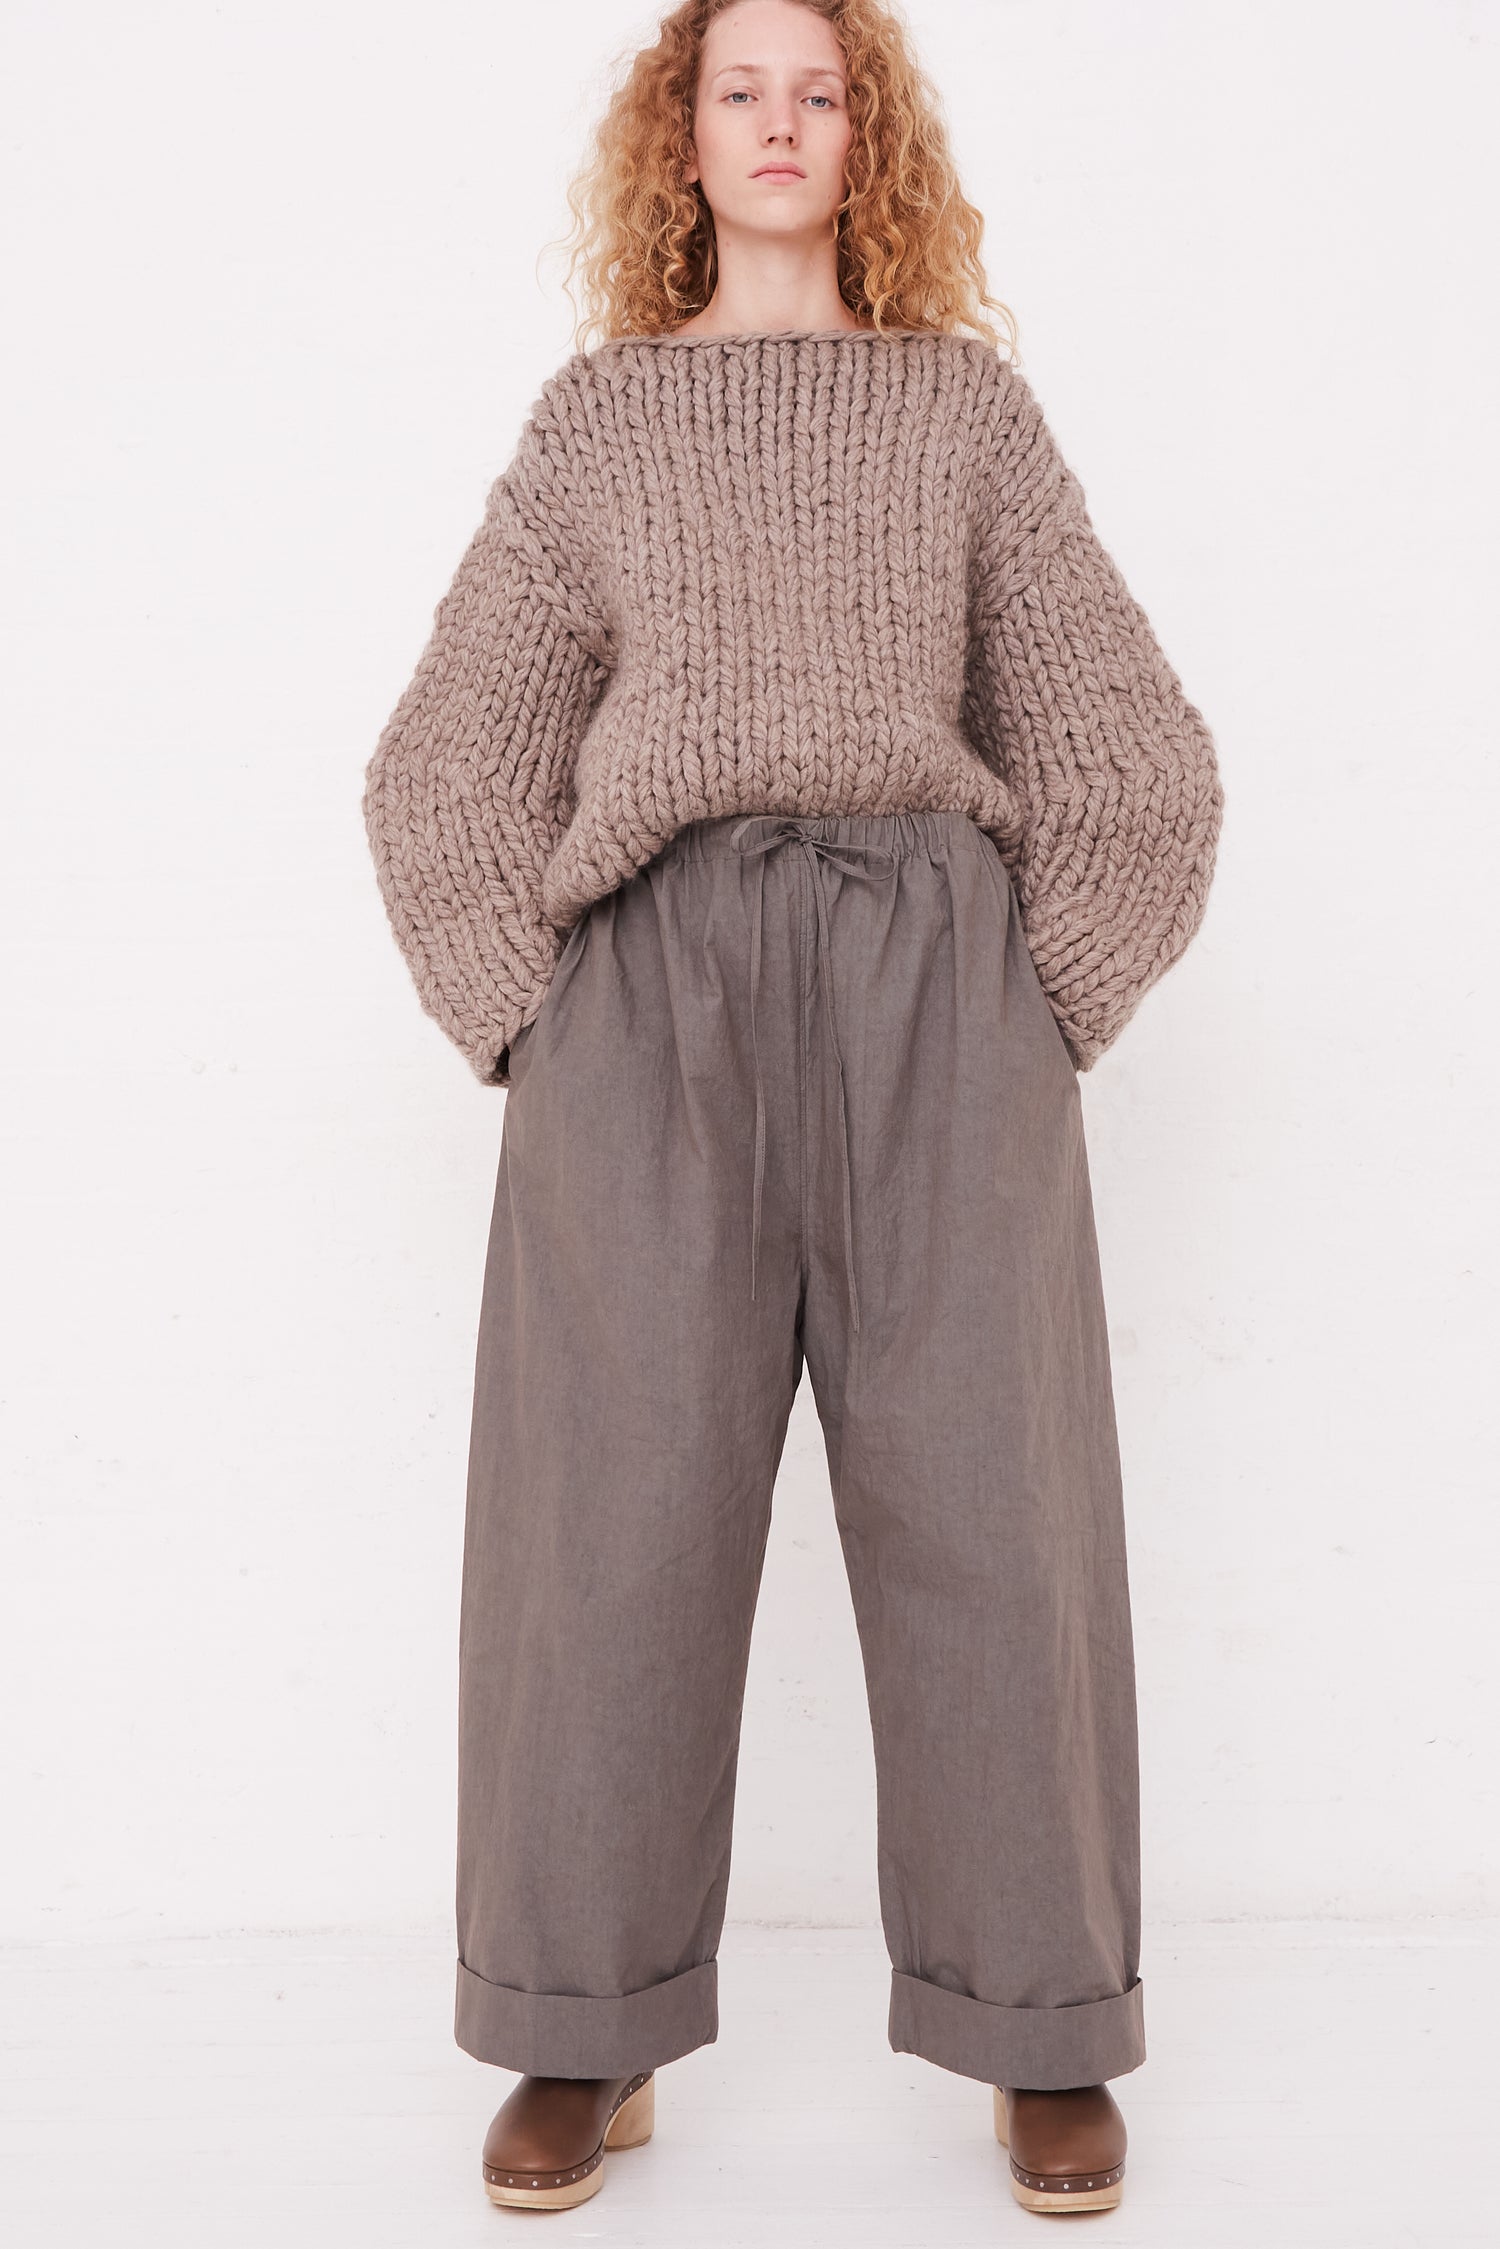 A woman in Lauren Manoogian's Duvet Pant in Lead and a sweater with an elasticated waist.